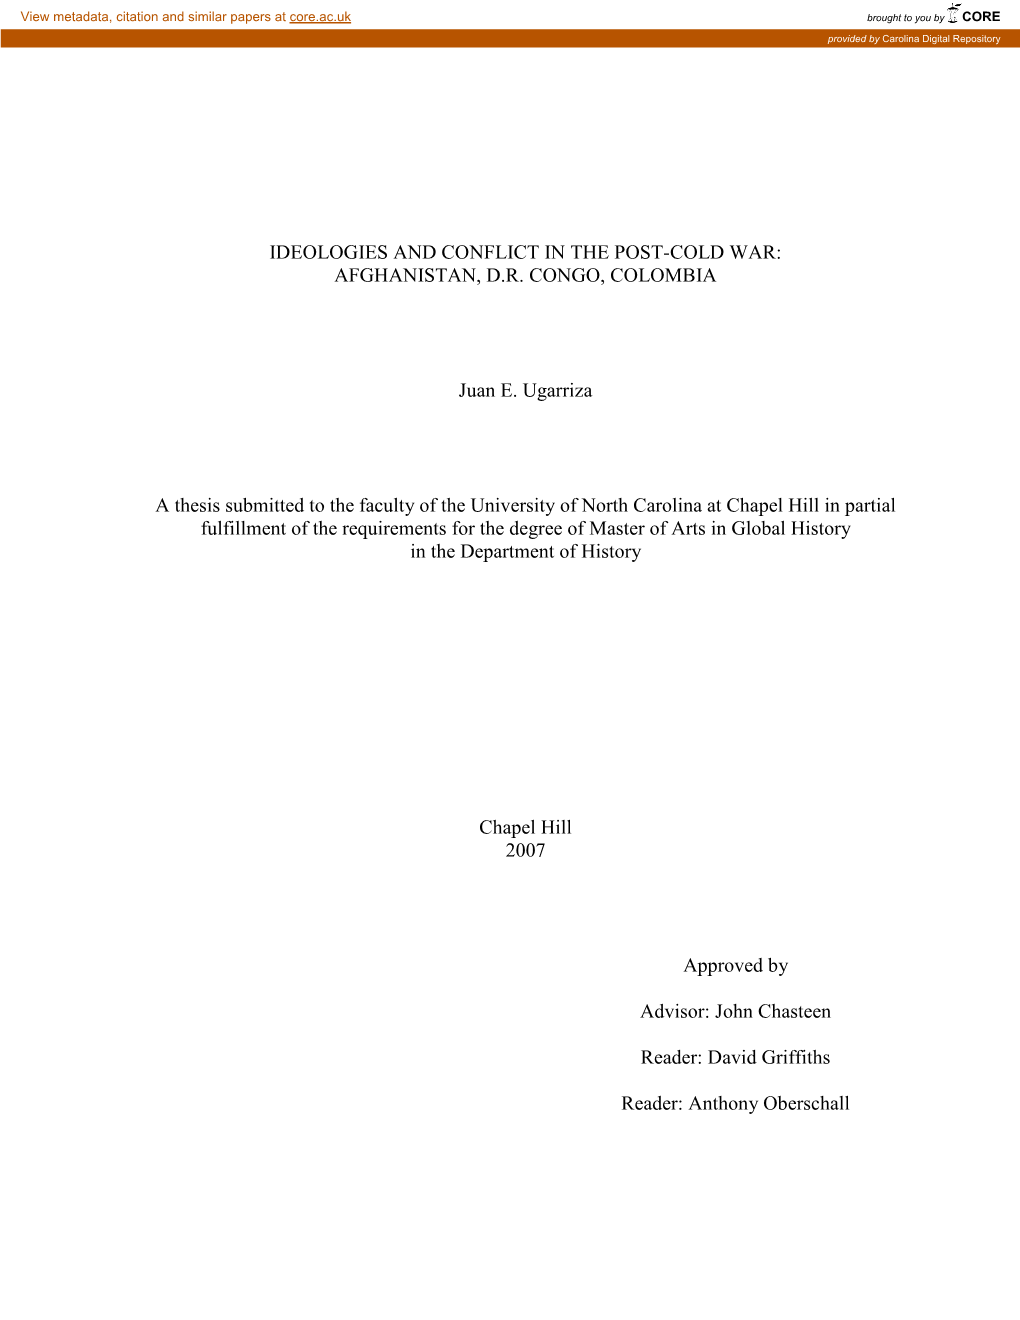 Ideologies and Conflict in the Post-Cold War: Afghanistan, D.R